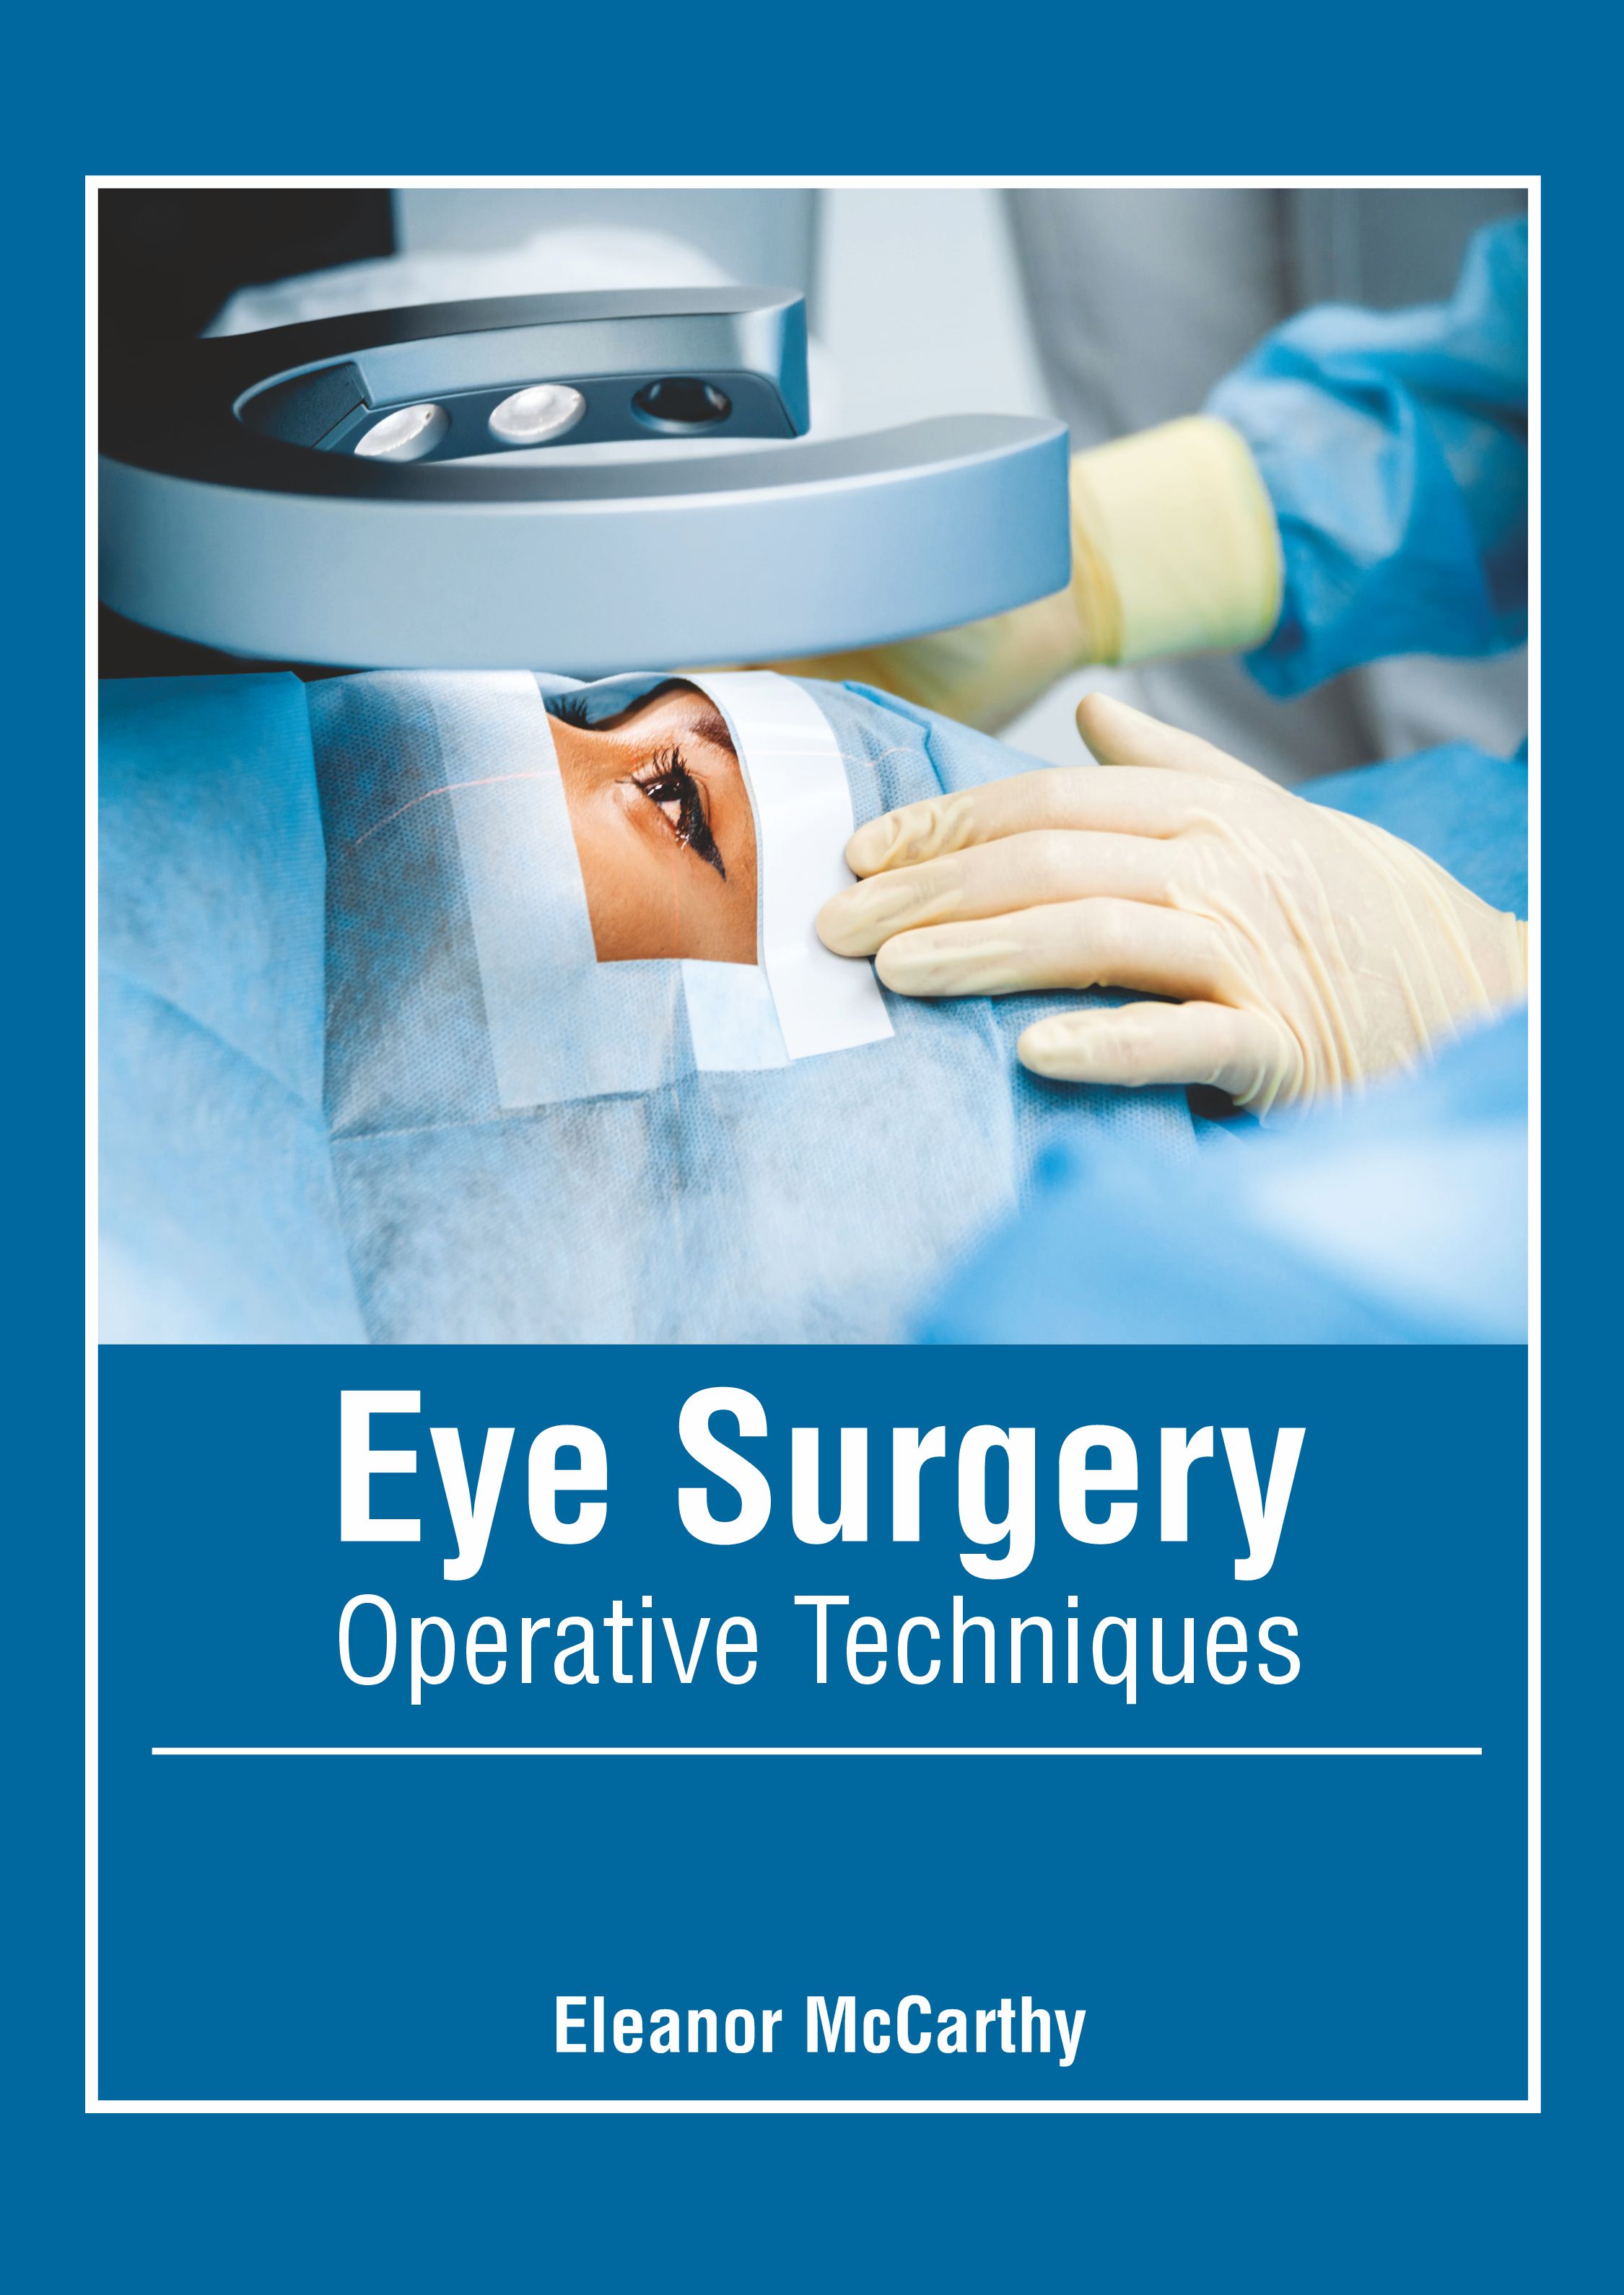 

exclusive-publishers/american-medical-publishers/eye-surgery-operative-techniques-9781639273812